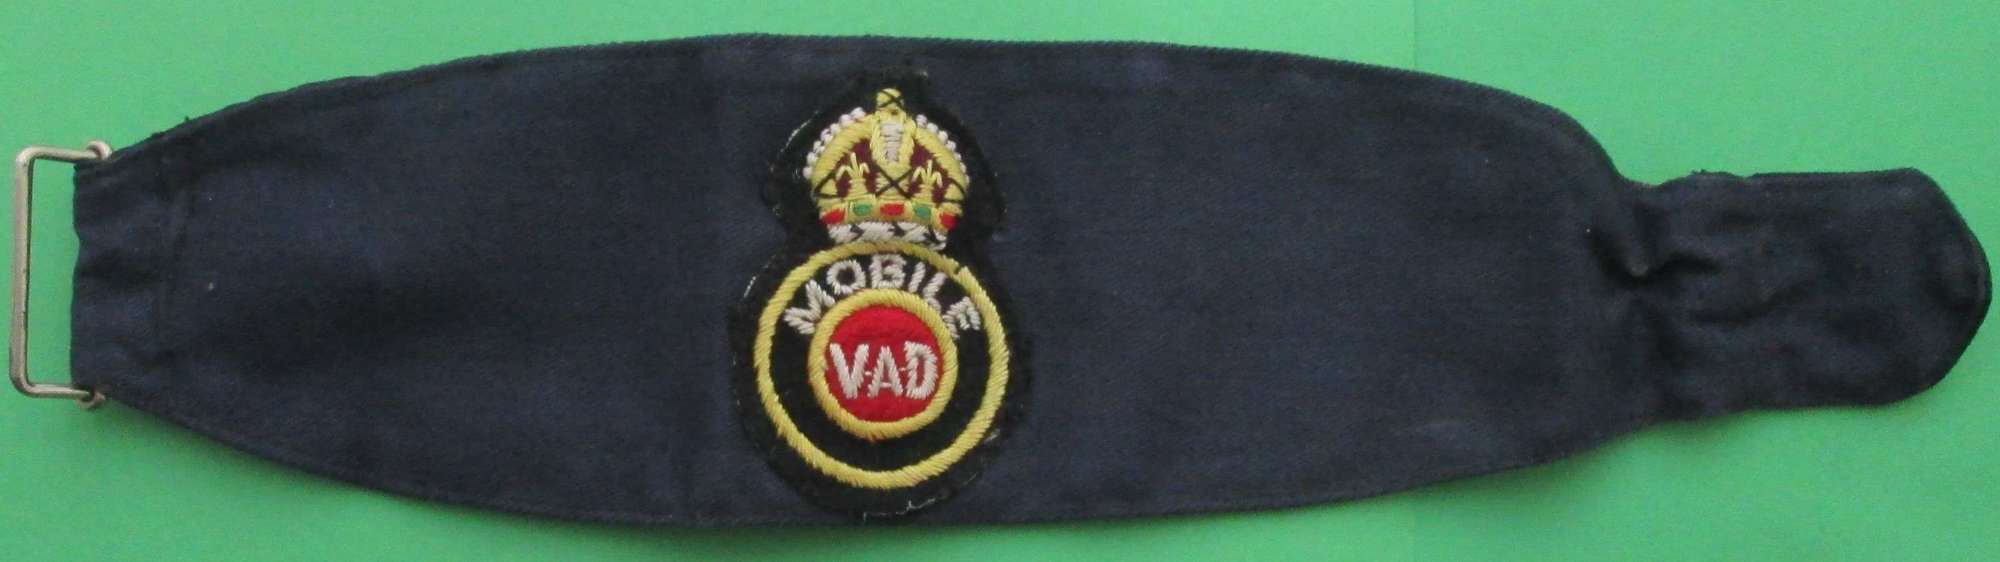 WWII PERIOD BRITISH RED CROSS MOBILE VAD NAMED ARMBAND